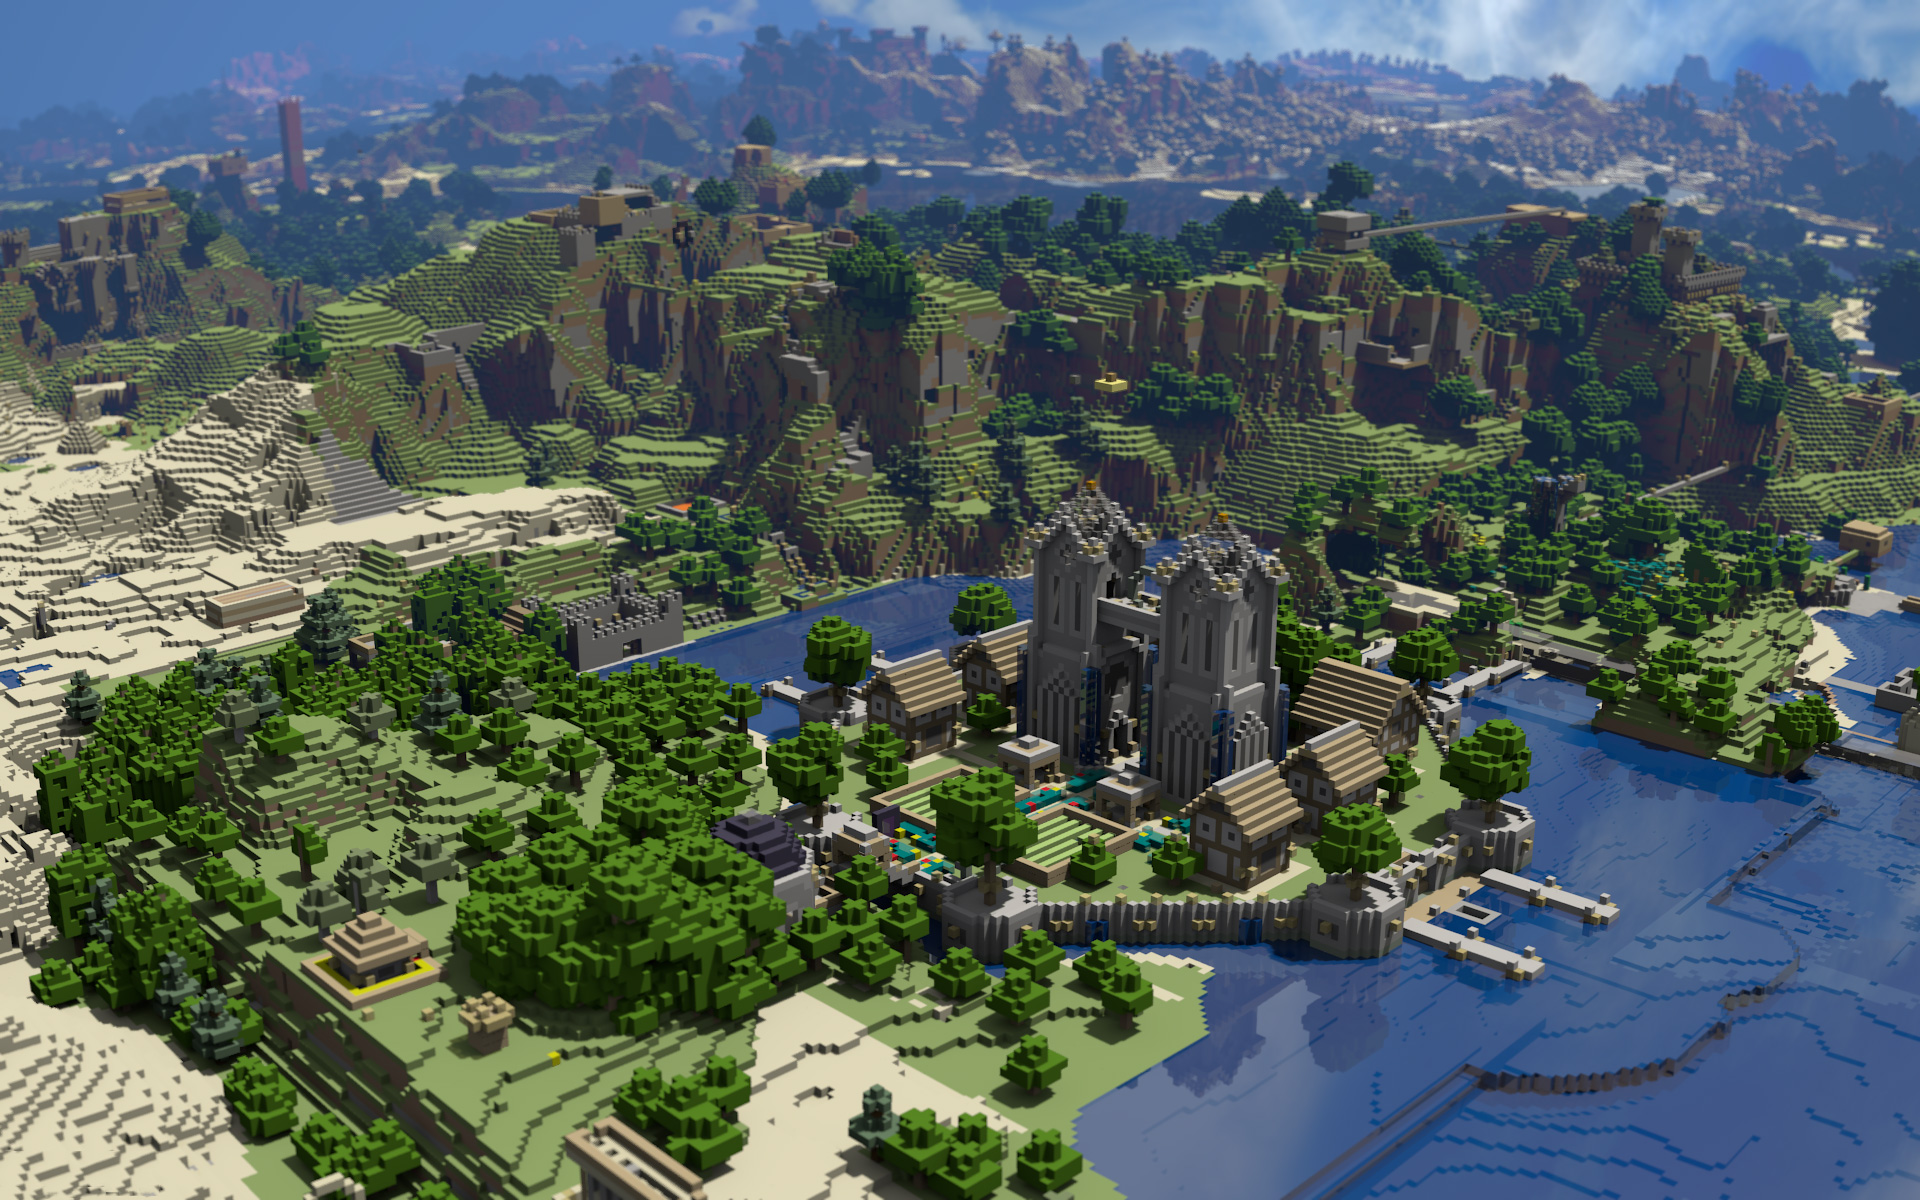 minecraft, mojang, video game, castle, mountain